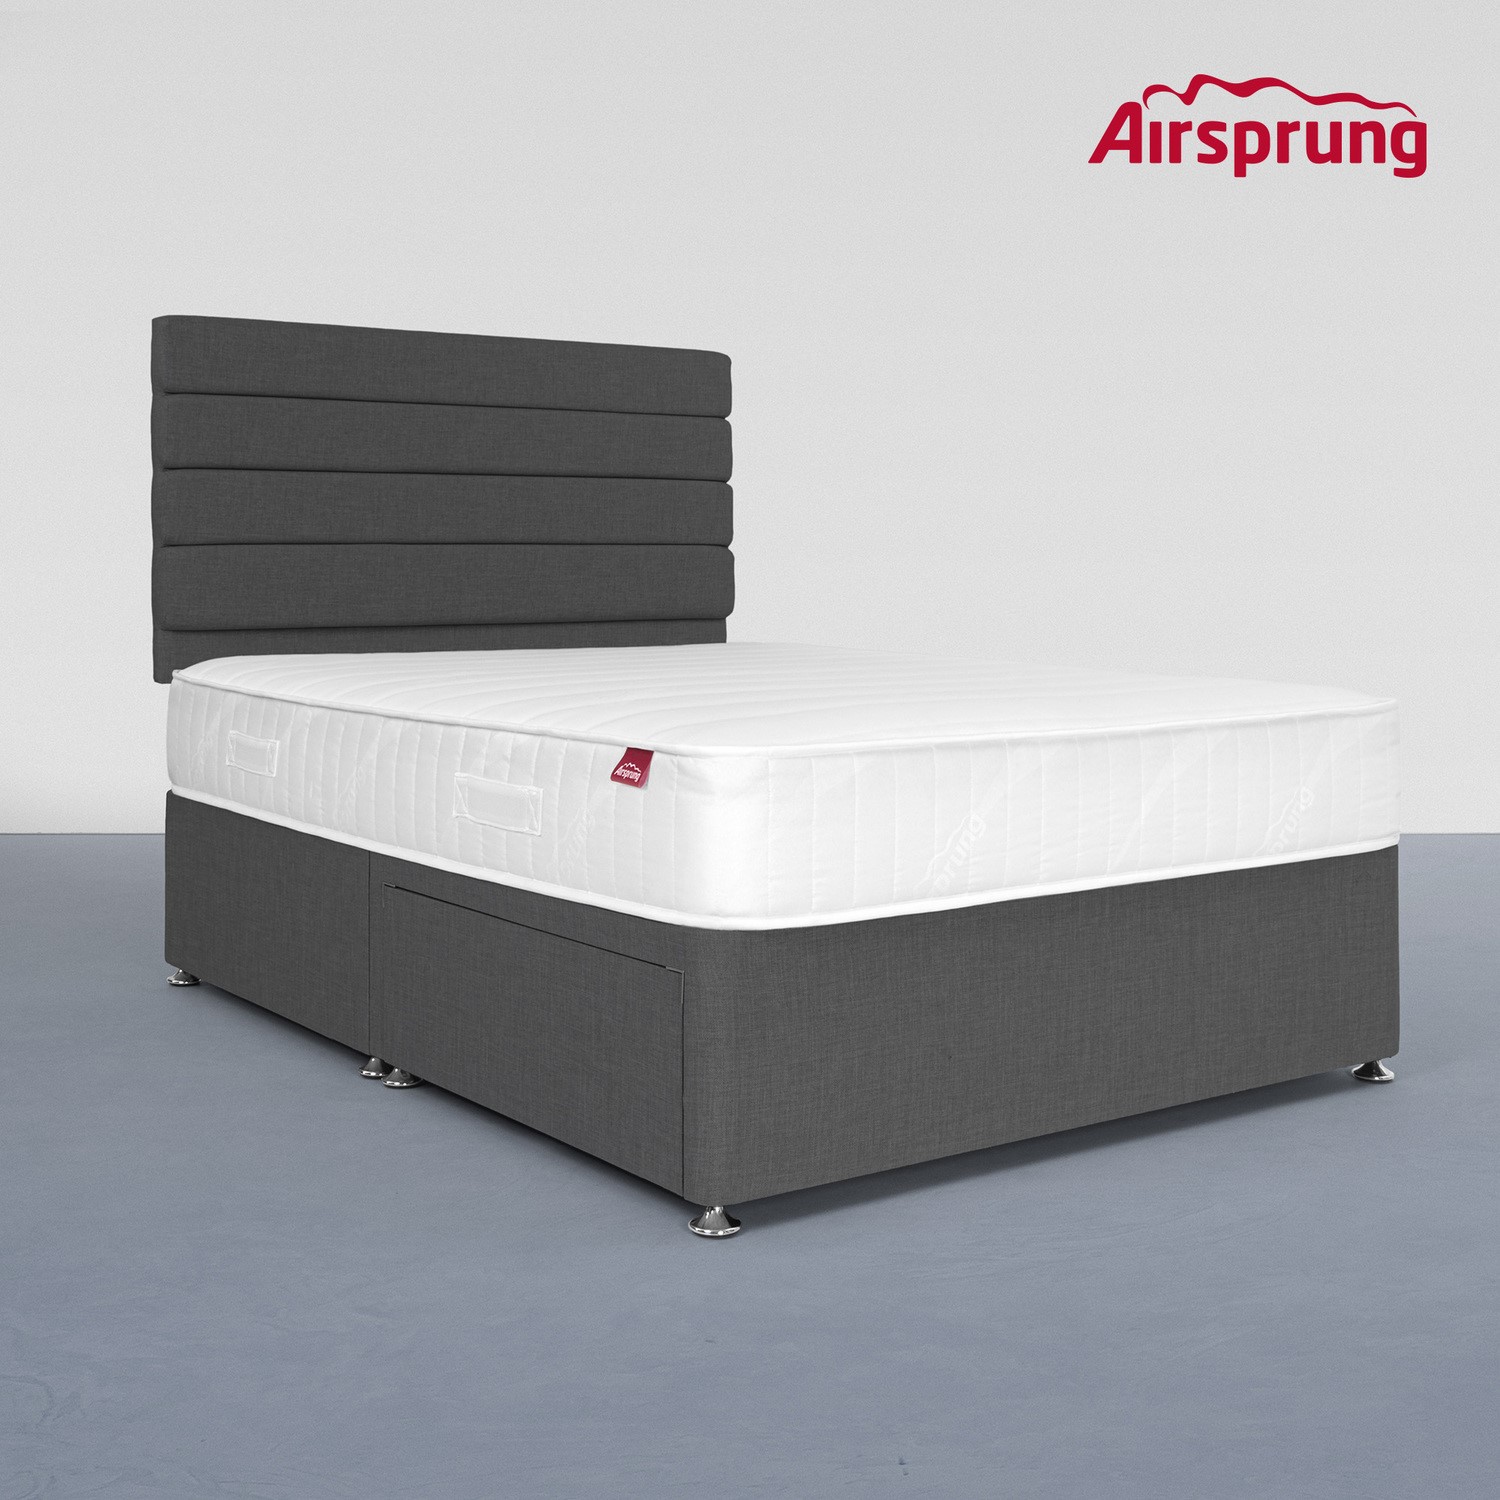 Photo of Airsprung king size 2 drawer divan bed with hybrid mattress - charcoal